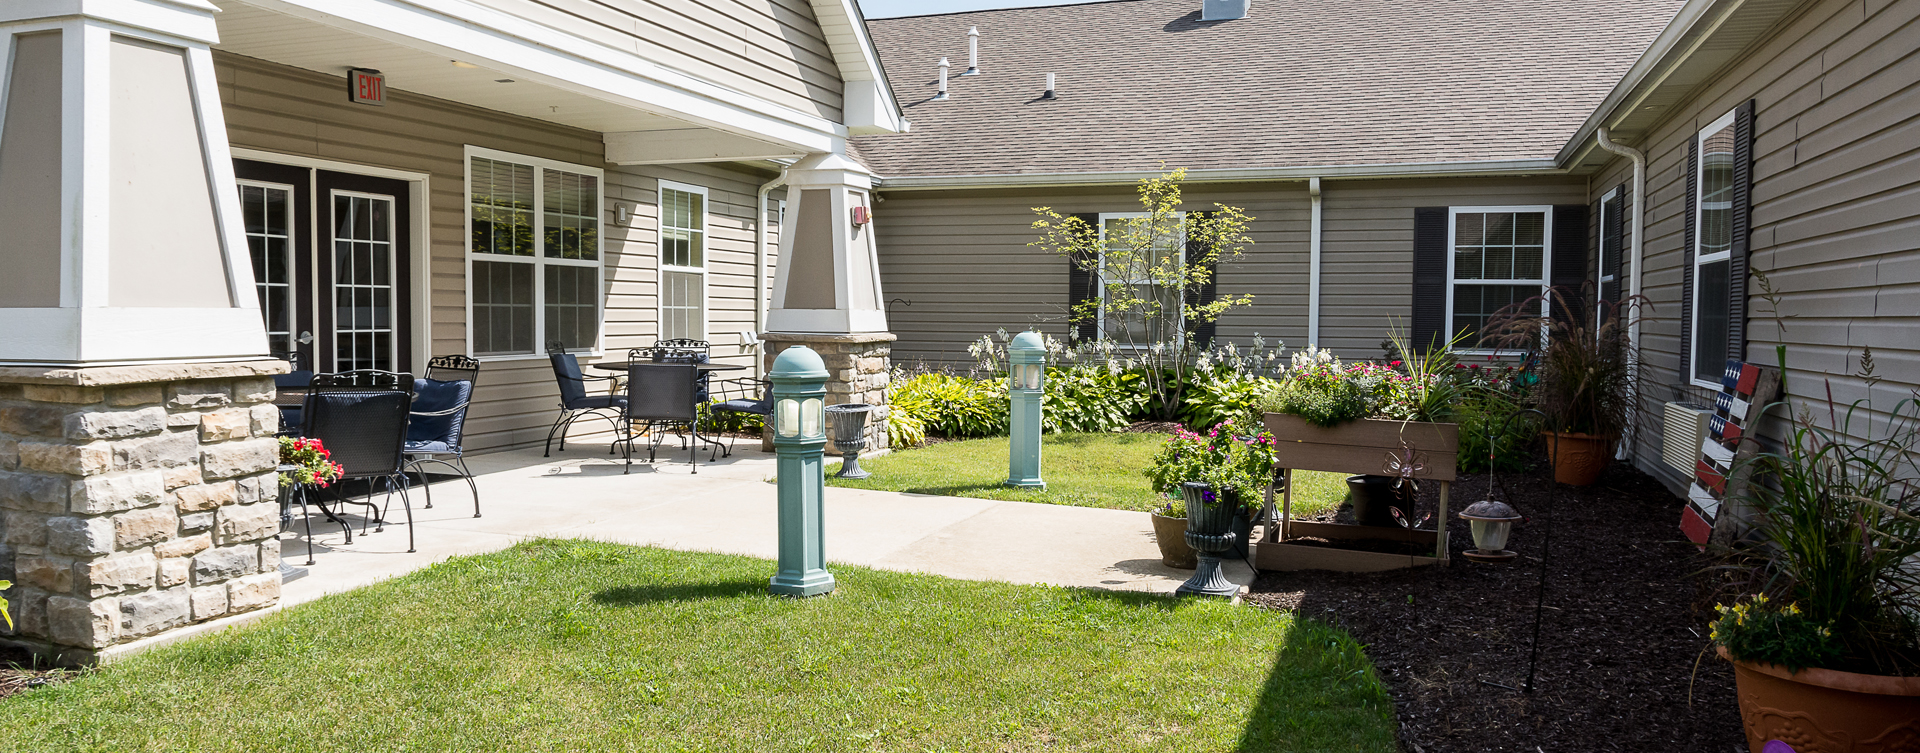 Residents with dementia can enjoy a traveling path, relaxed seating and raised garden beds in the courtyard at Bickford of Oswego